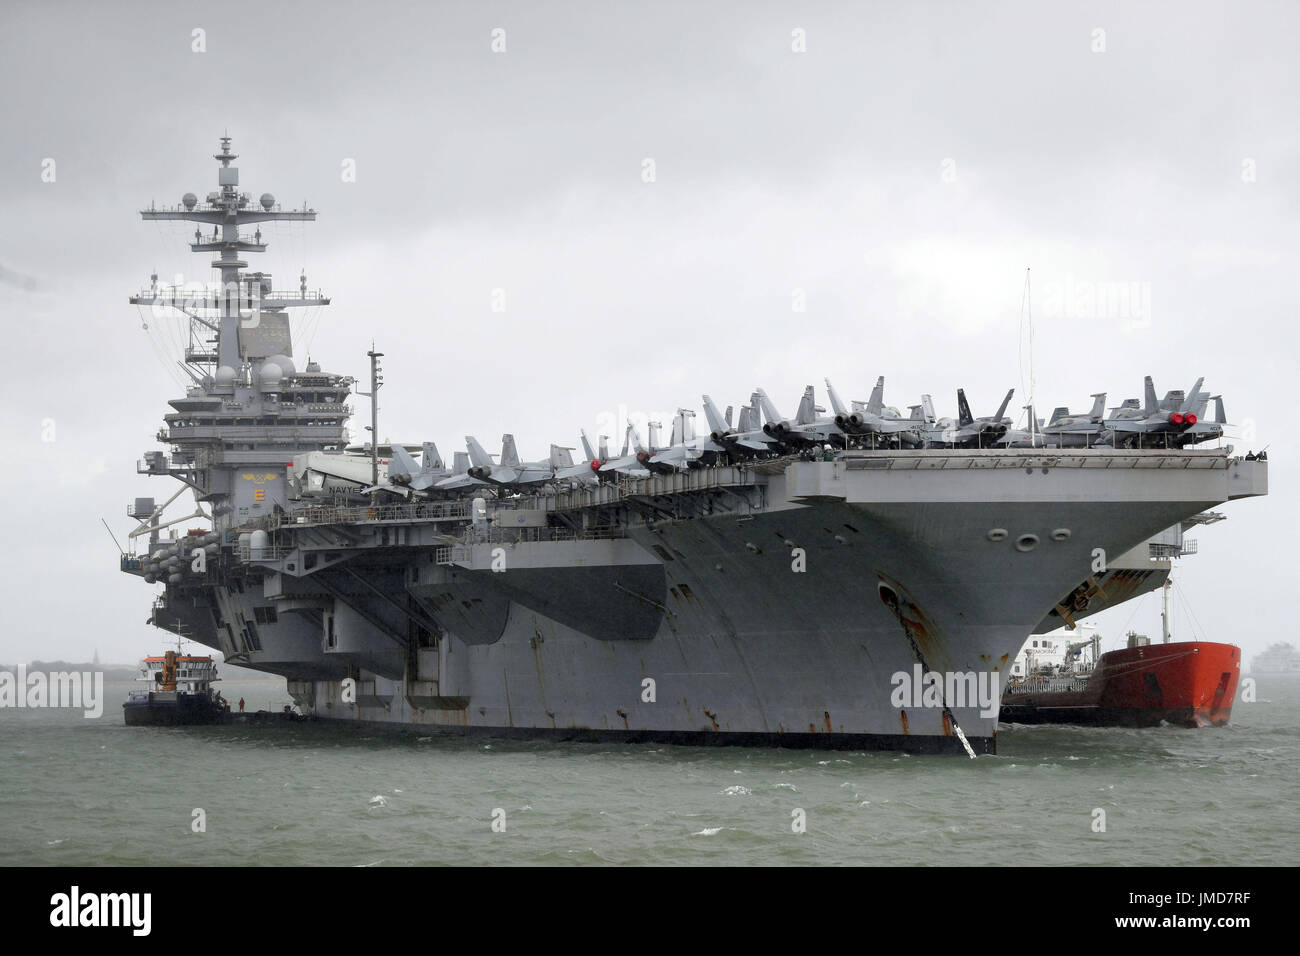 The US Navy Nimitz-class aircraft carrier USS George H.W. Bush as it lays at anchor off the coastbefore it participates n Exercise Saxon Warrior 2017 in the Northern Atlantic Ocean. Stock Photo